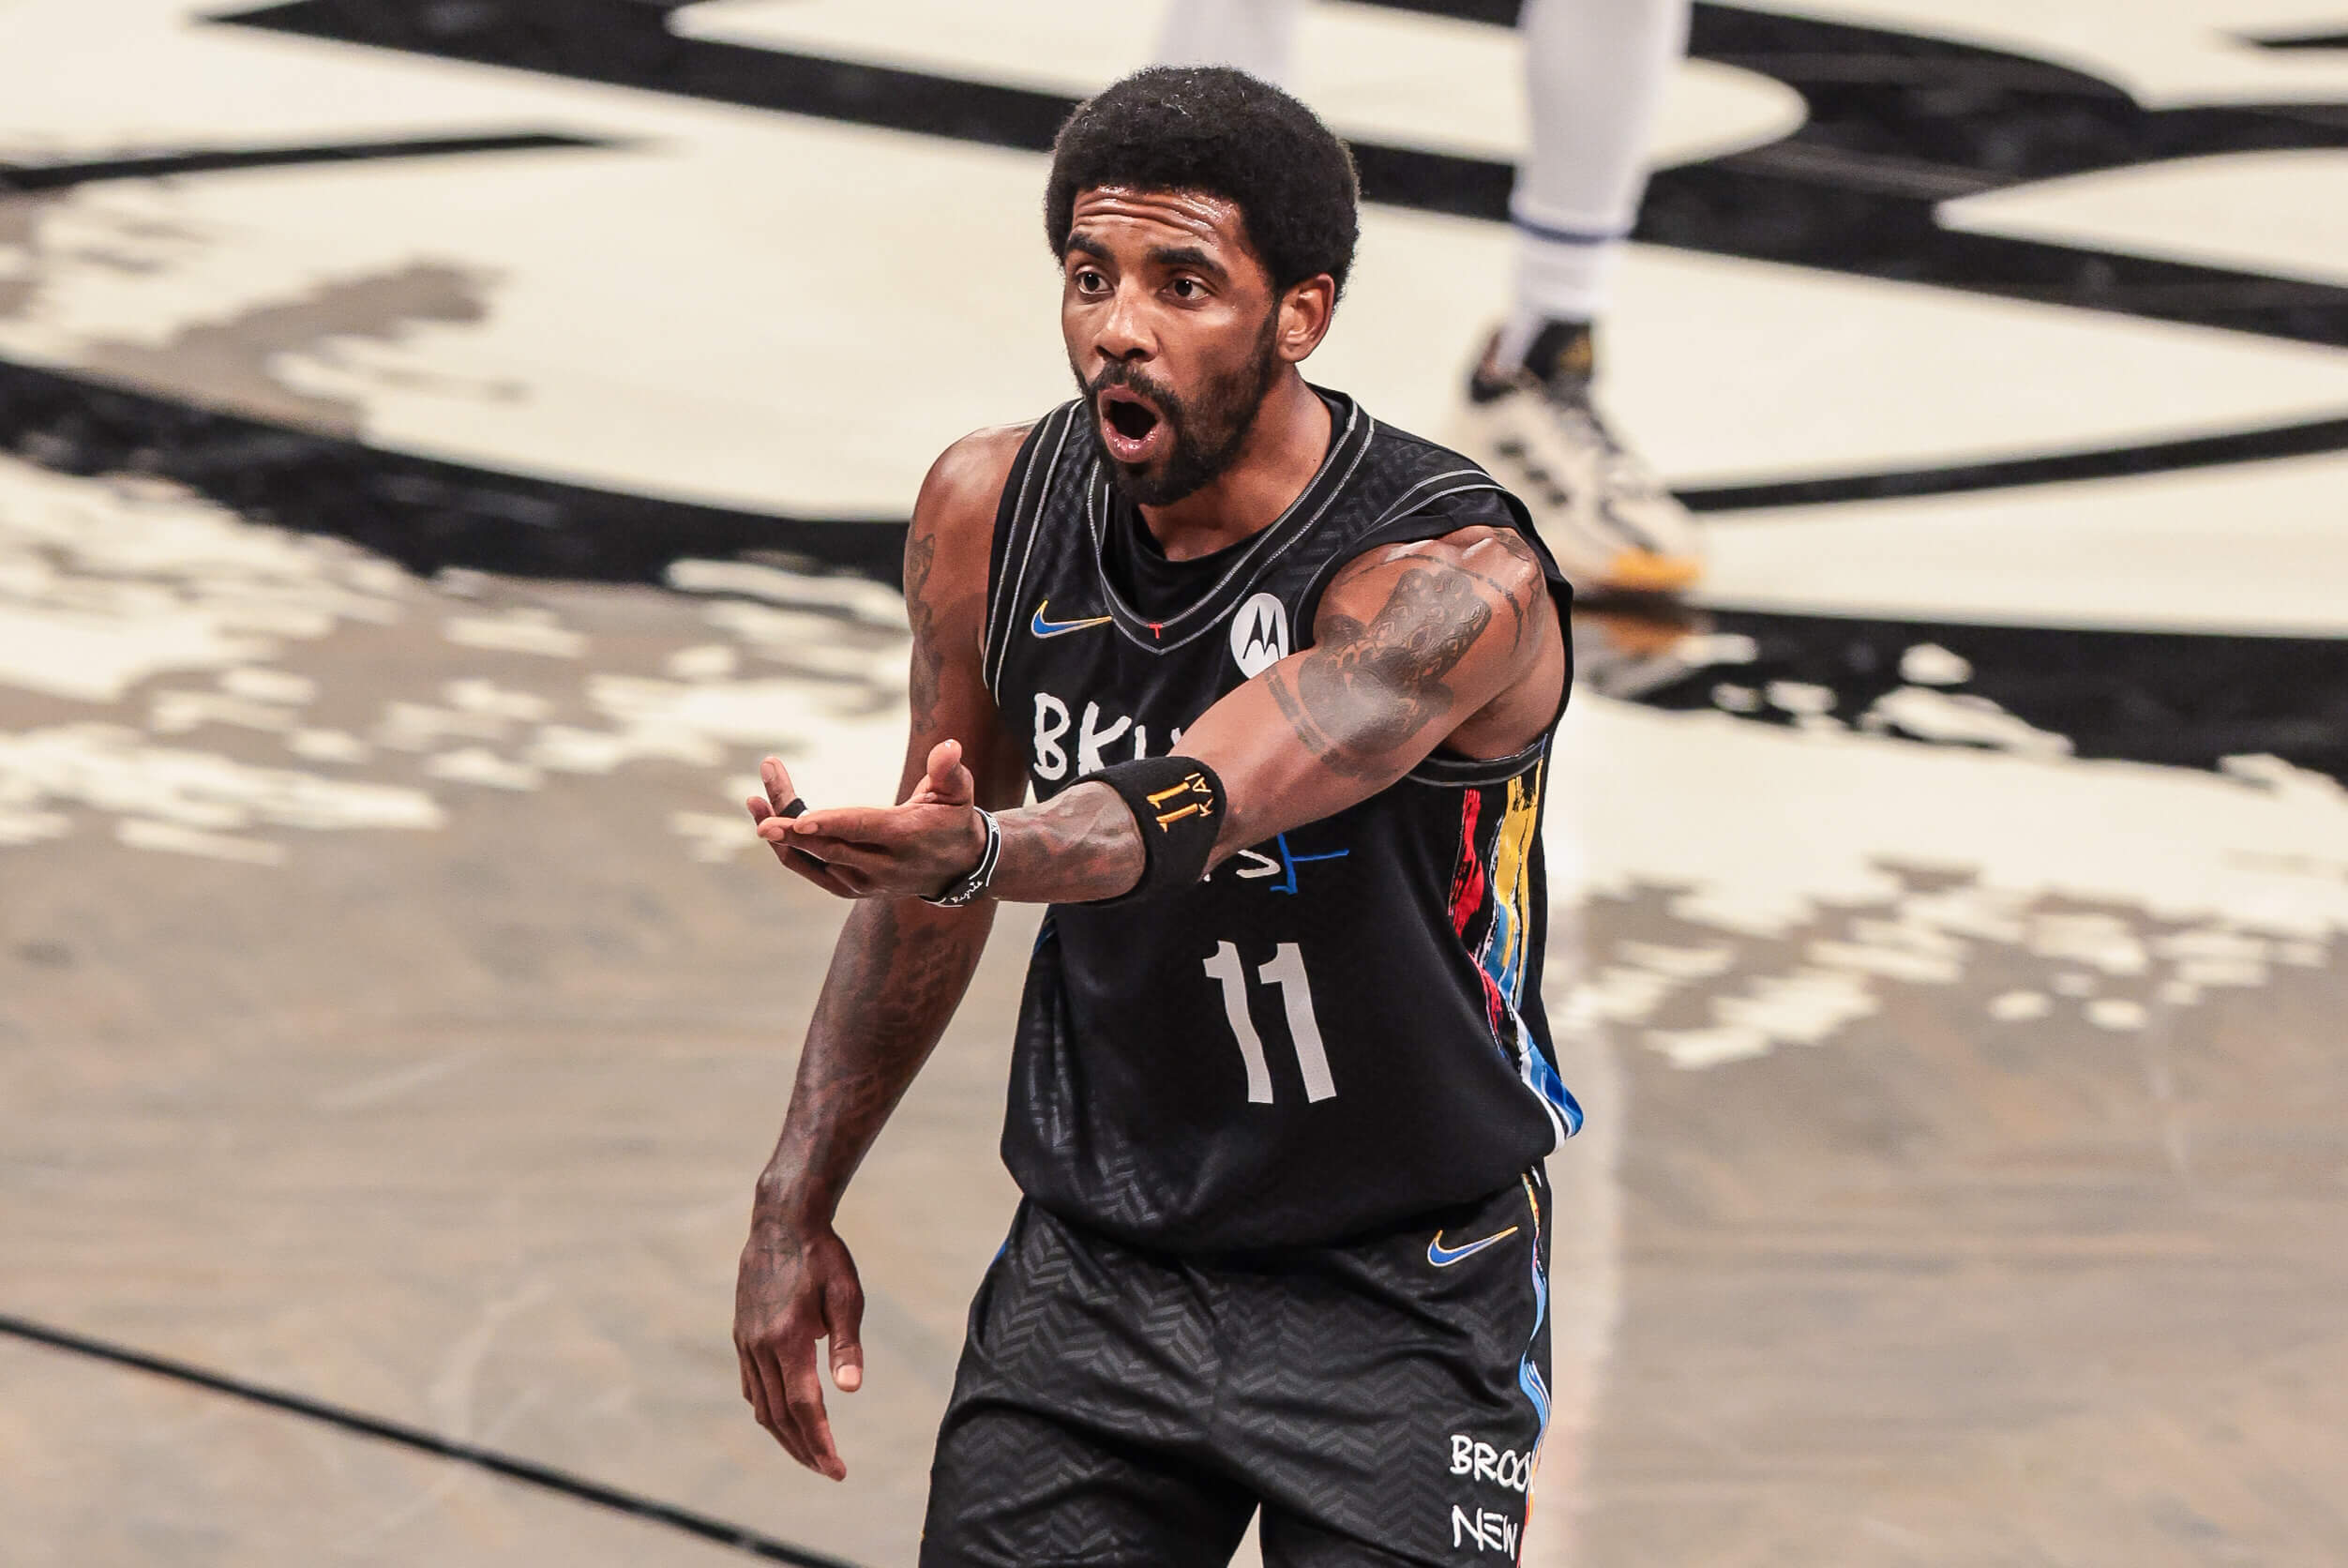 kyrie irving nets jersey youth